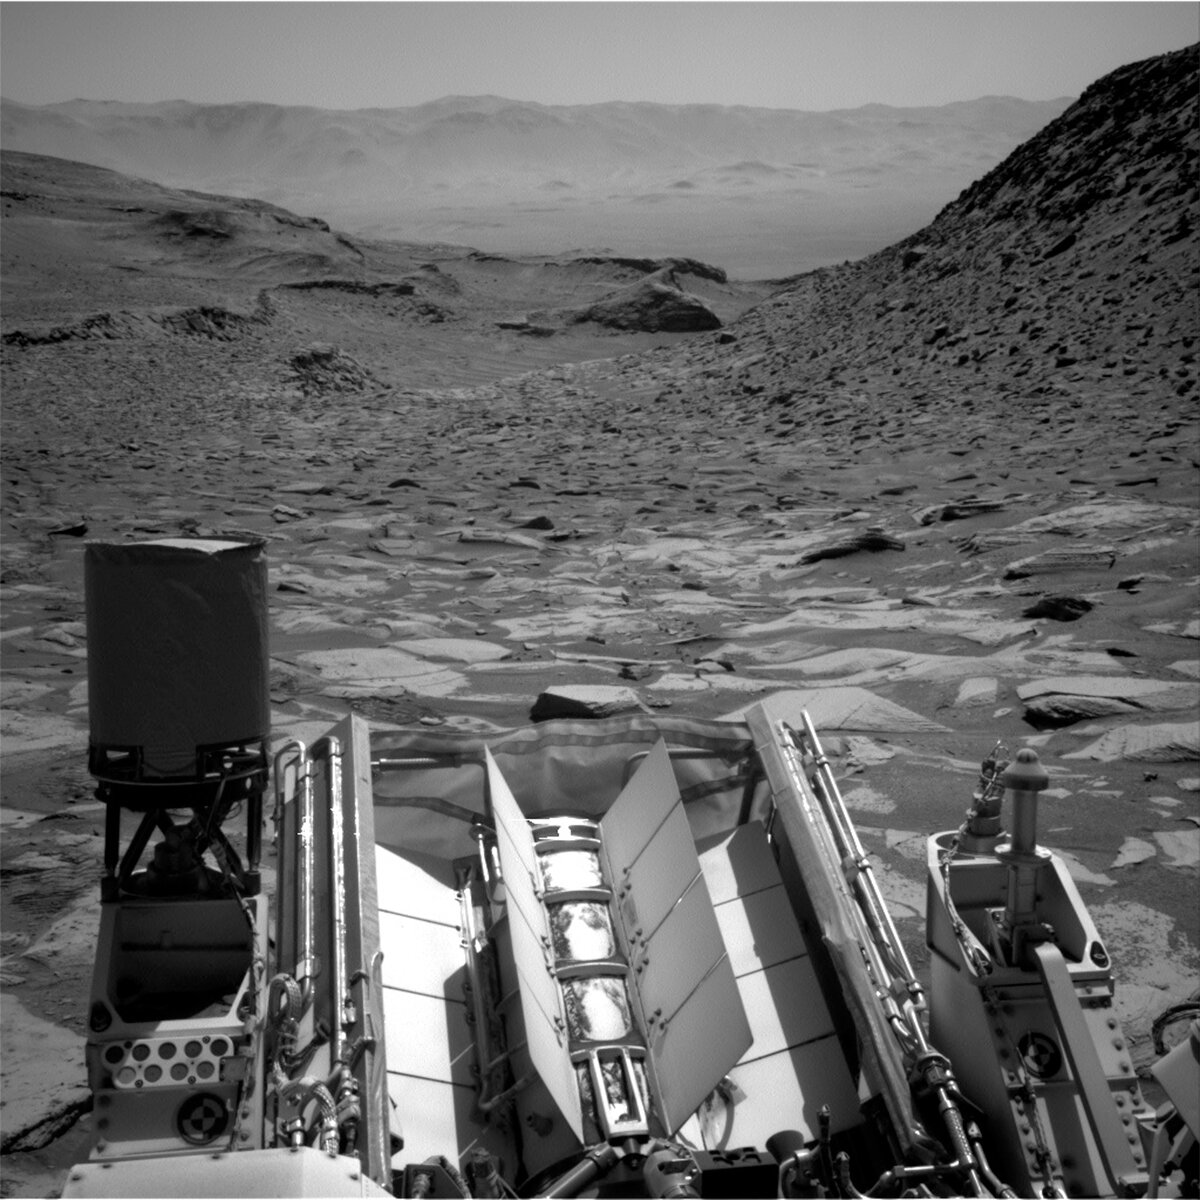 This image shows part of the Curiosity rover overlooking a canyon of rocks on the Mars surface and was taken by Right Navigation Camera onboard Curiosity on Sol 3872.